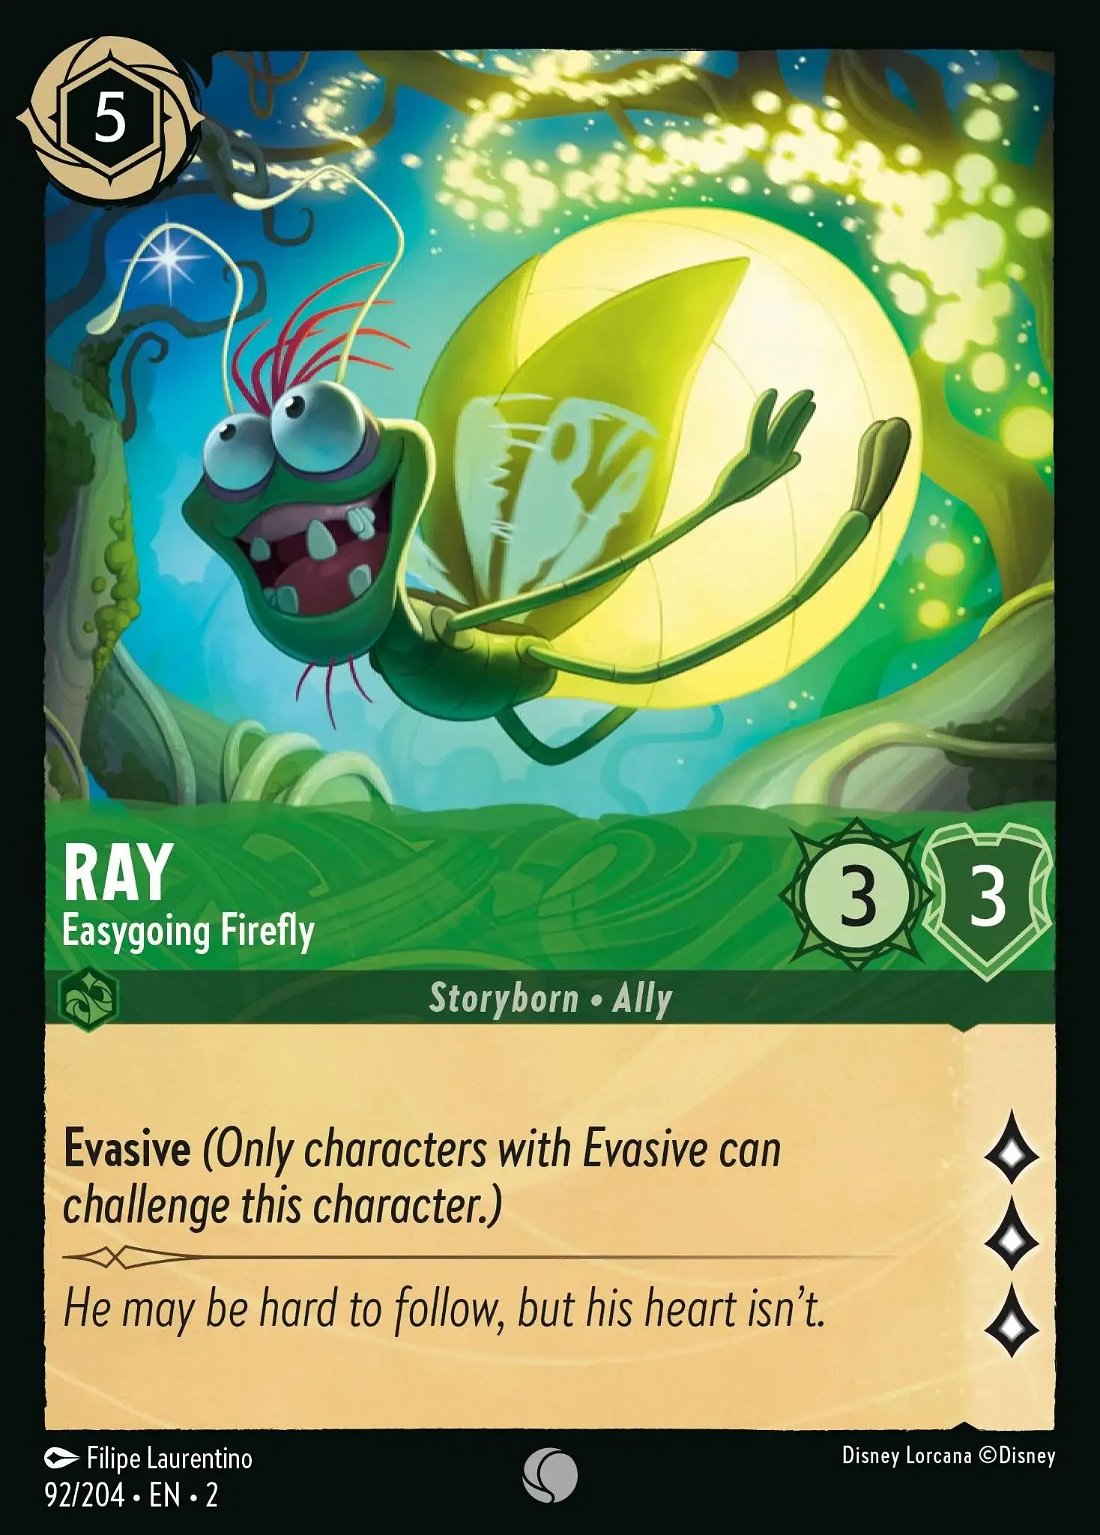 Ray - Easygoing Firefly Crop image Wallpaper